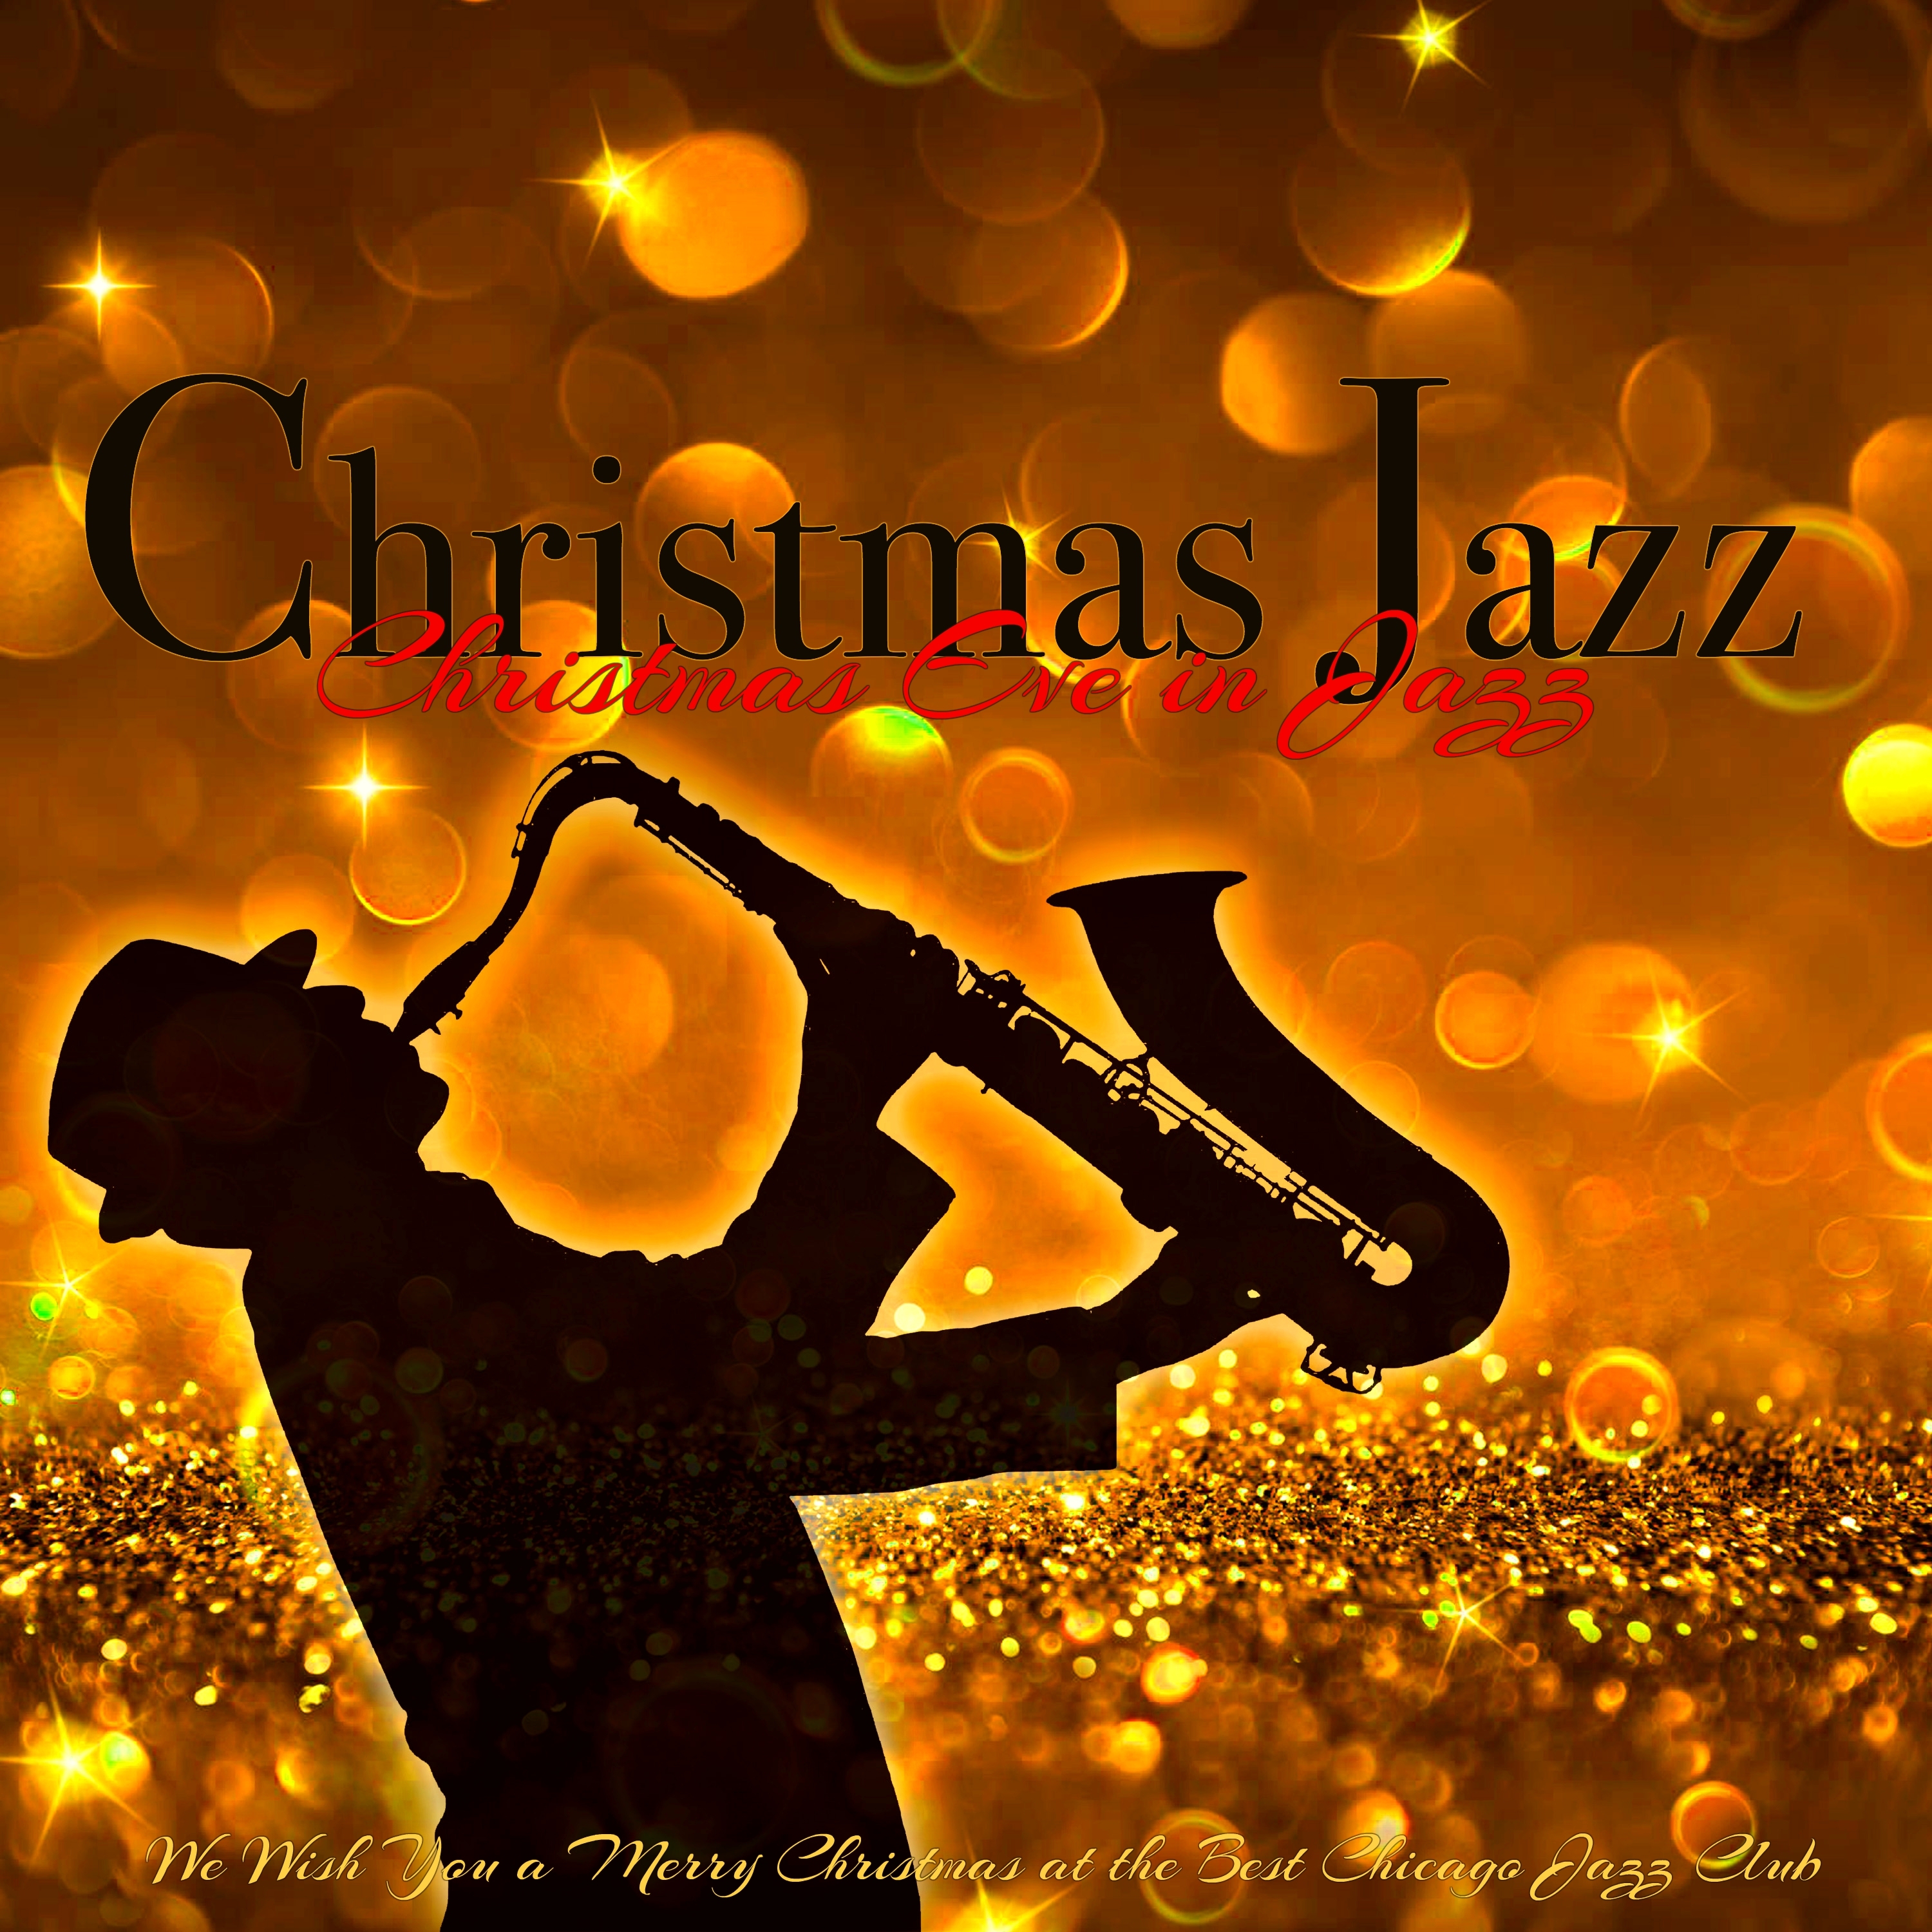 The Pianist - Christmas Eve at the Jazz Club